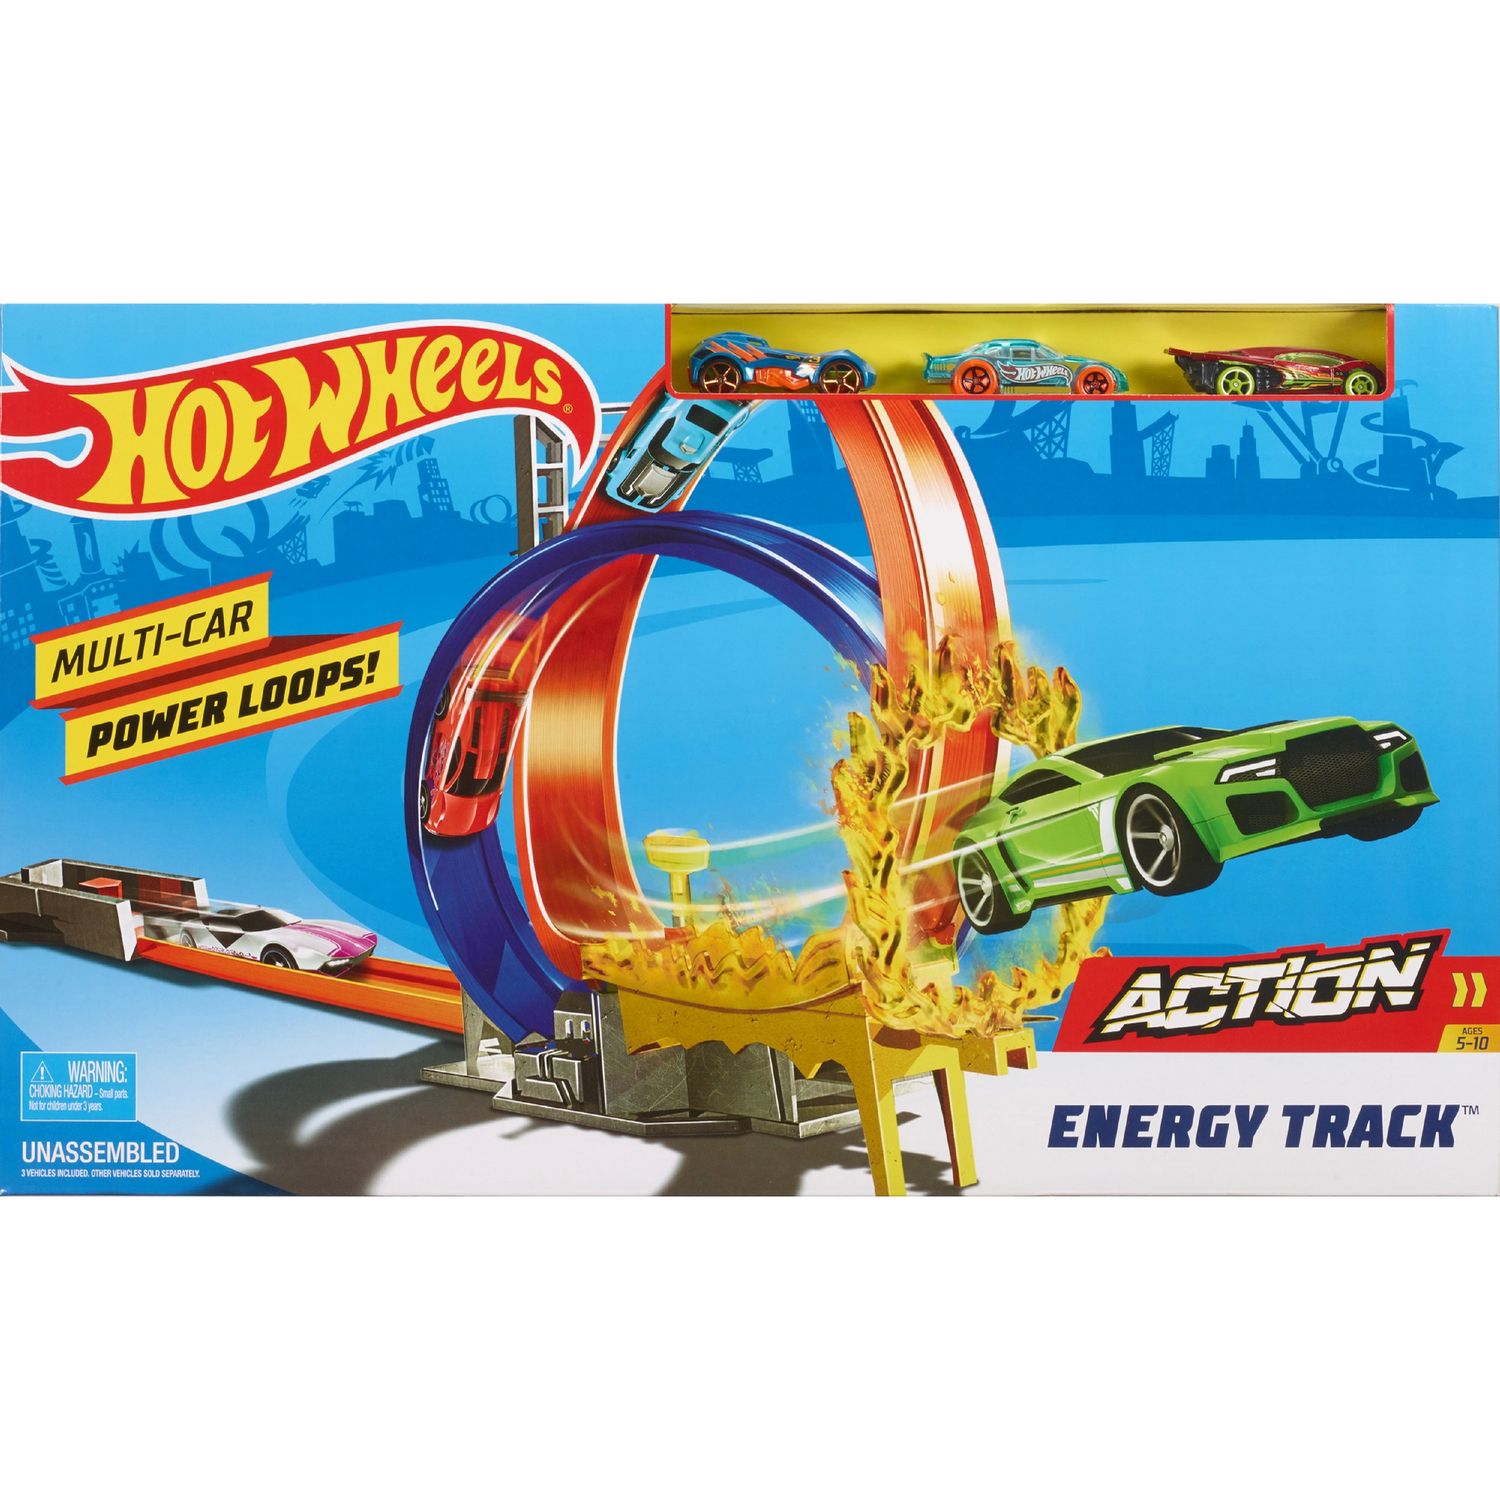 best buy rc helicopter